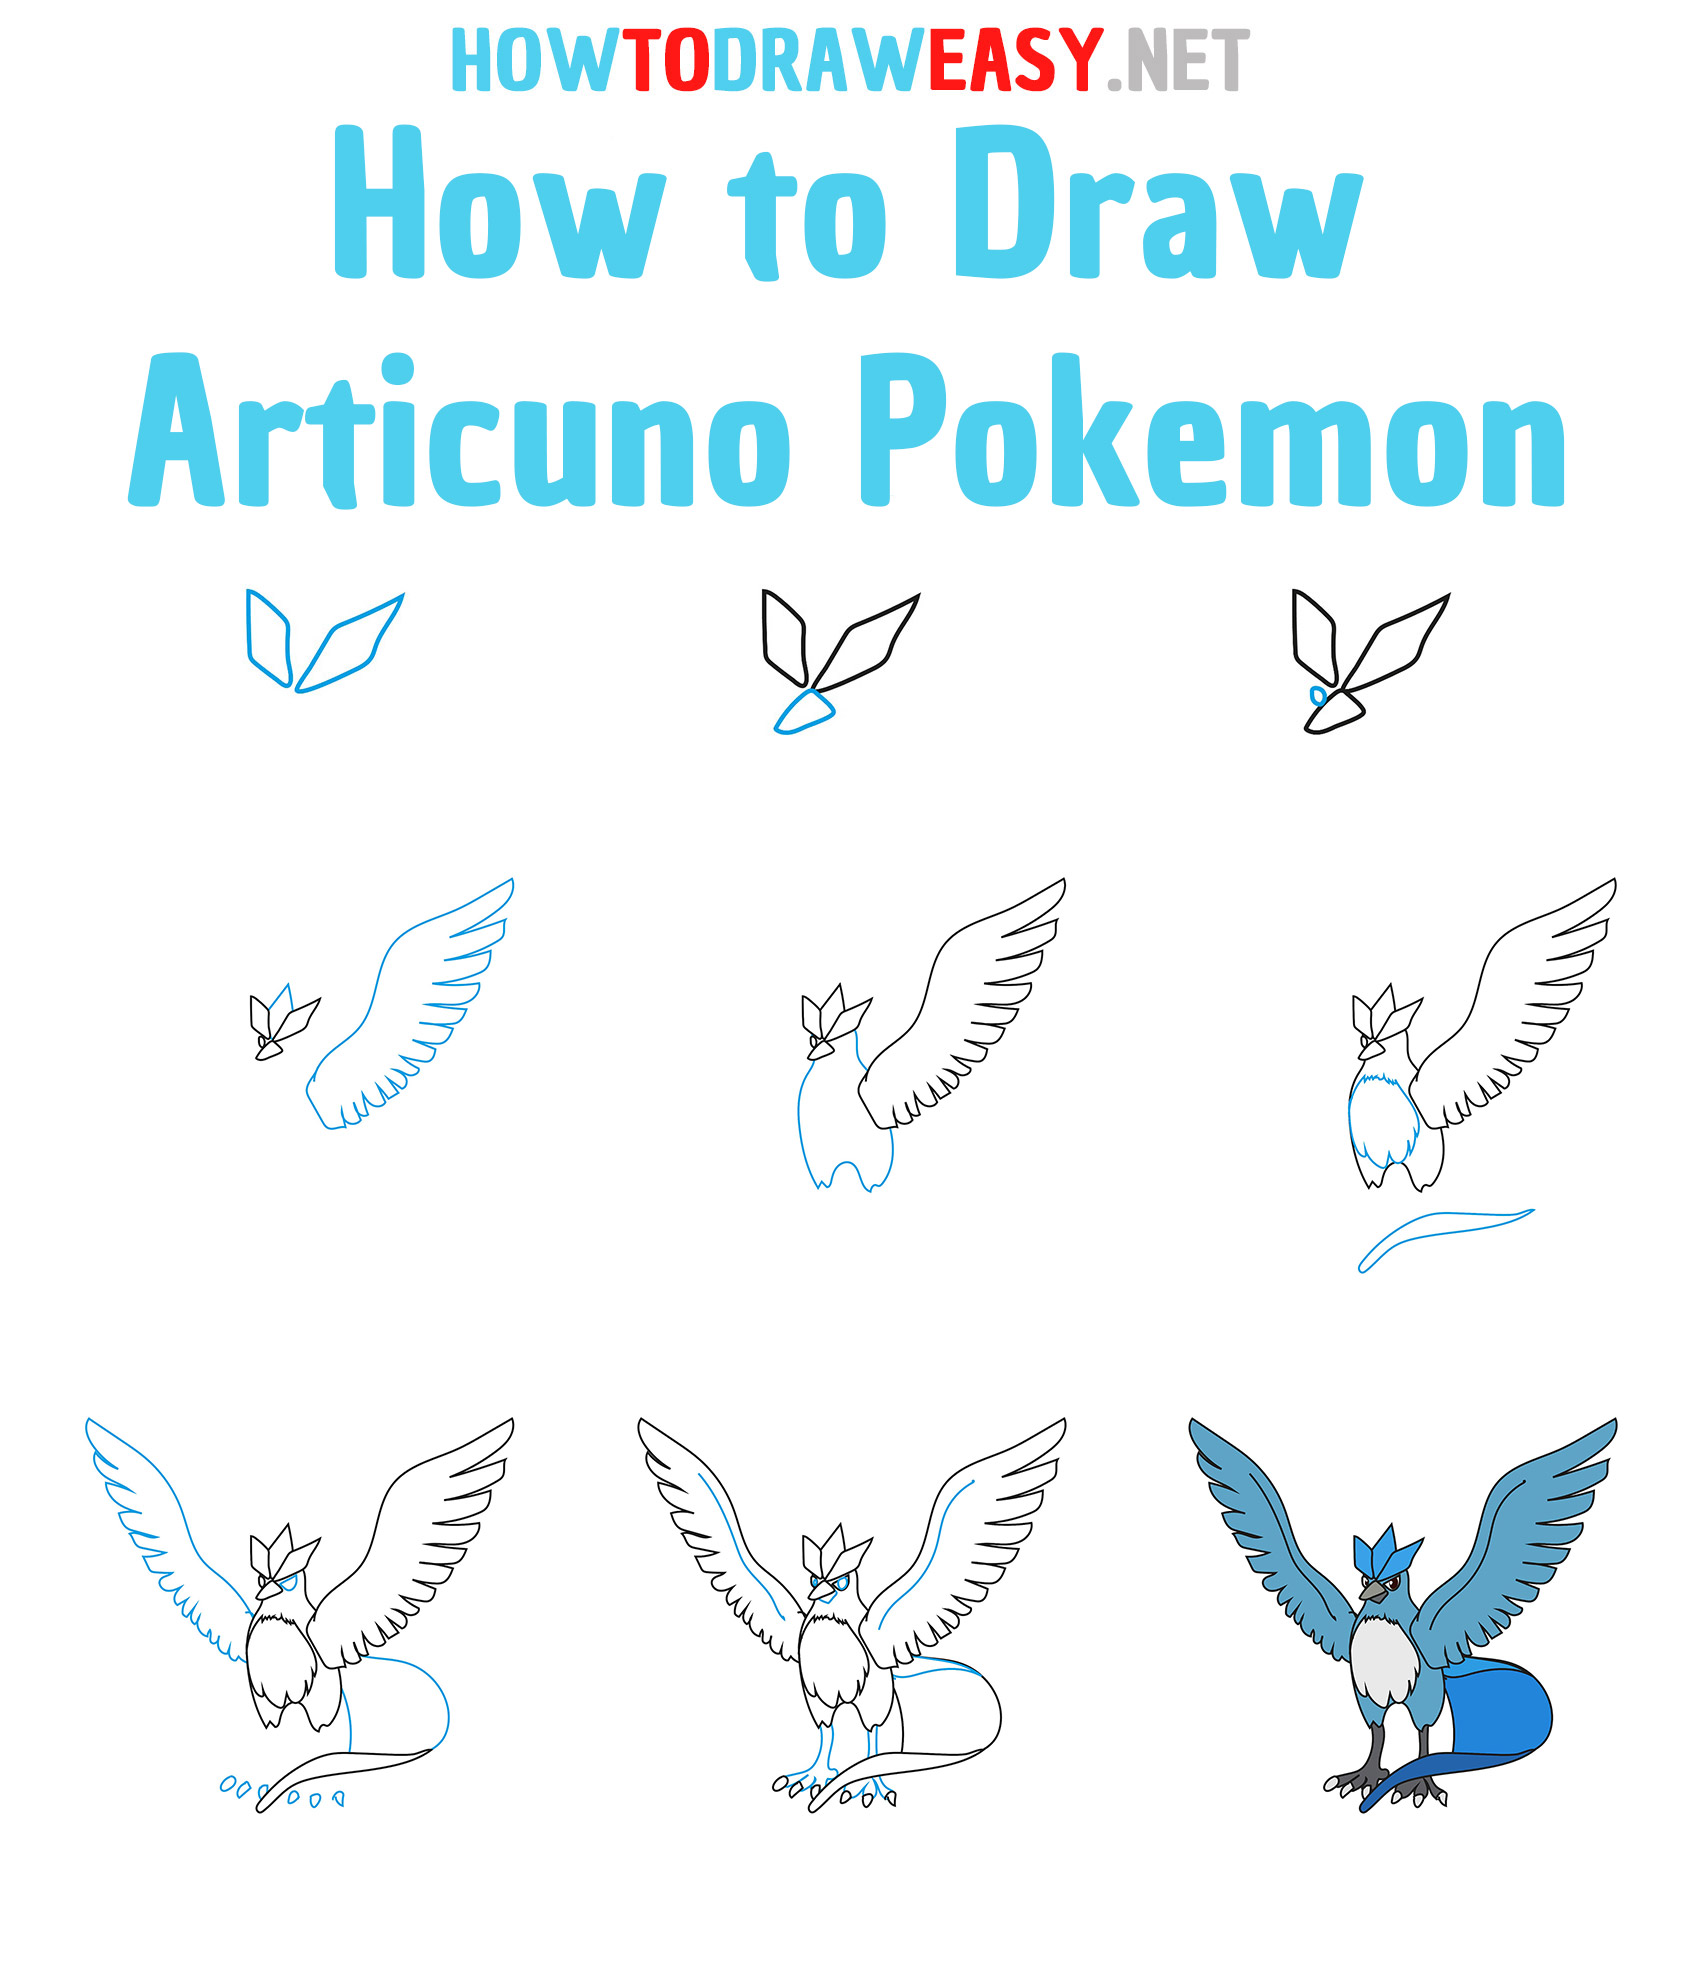 How to Draw Articuno Pokemon Step by Step